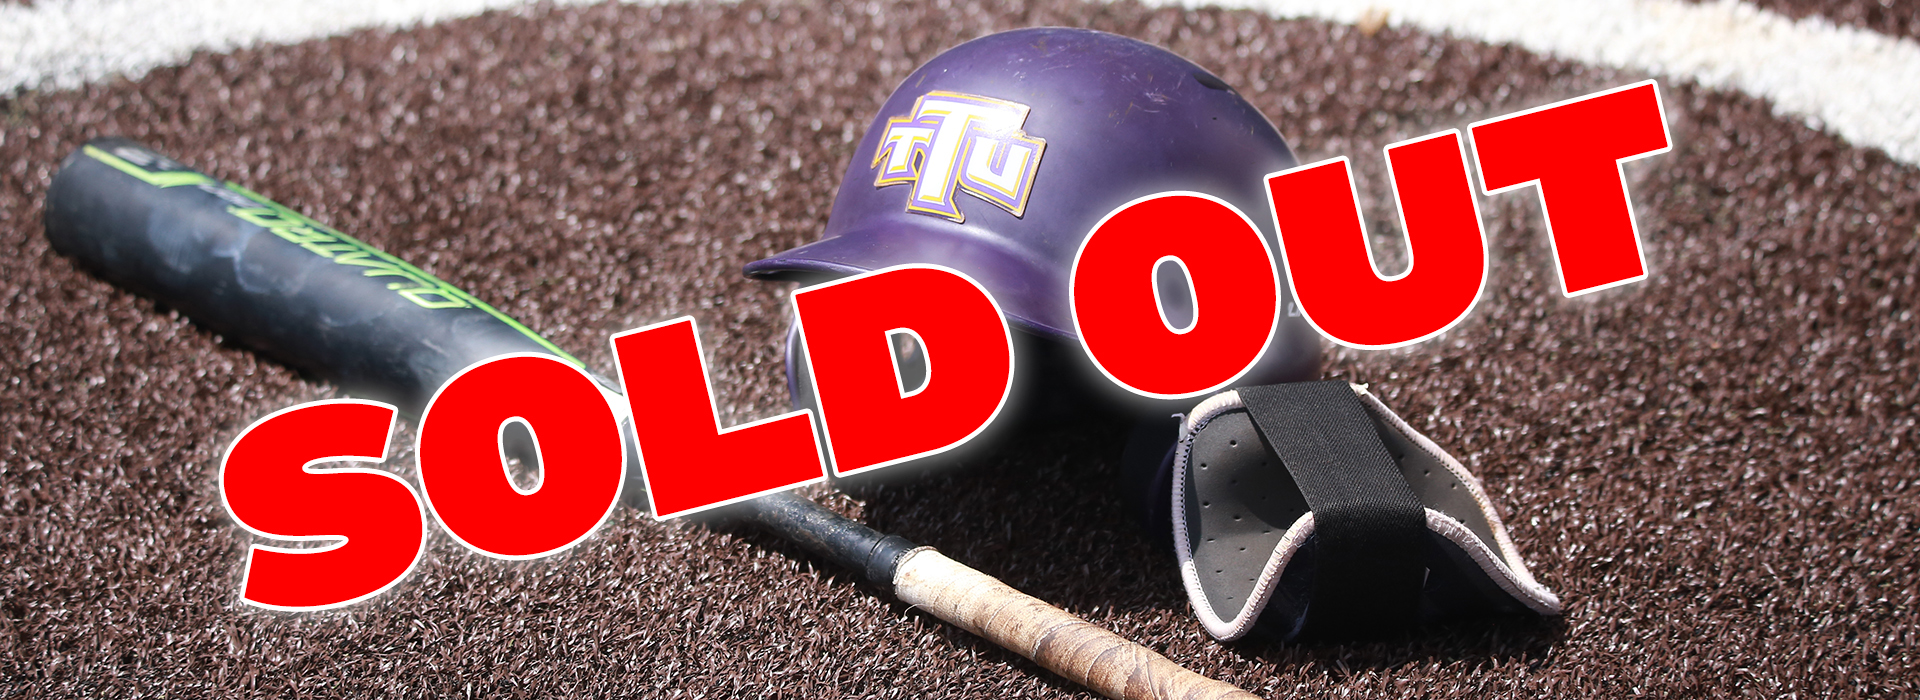 Tech baseball's First Pitch Banquet, 100th Anniversary Celebration on Jan. 28 sold out